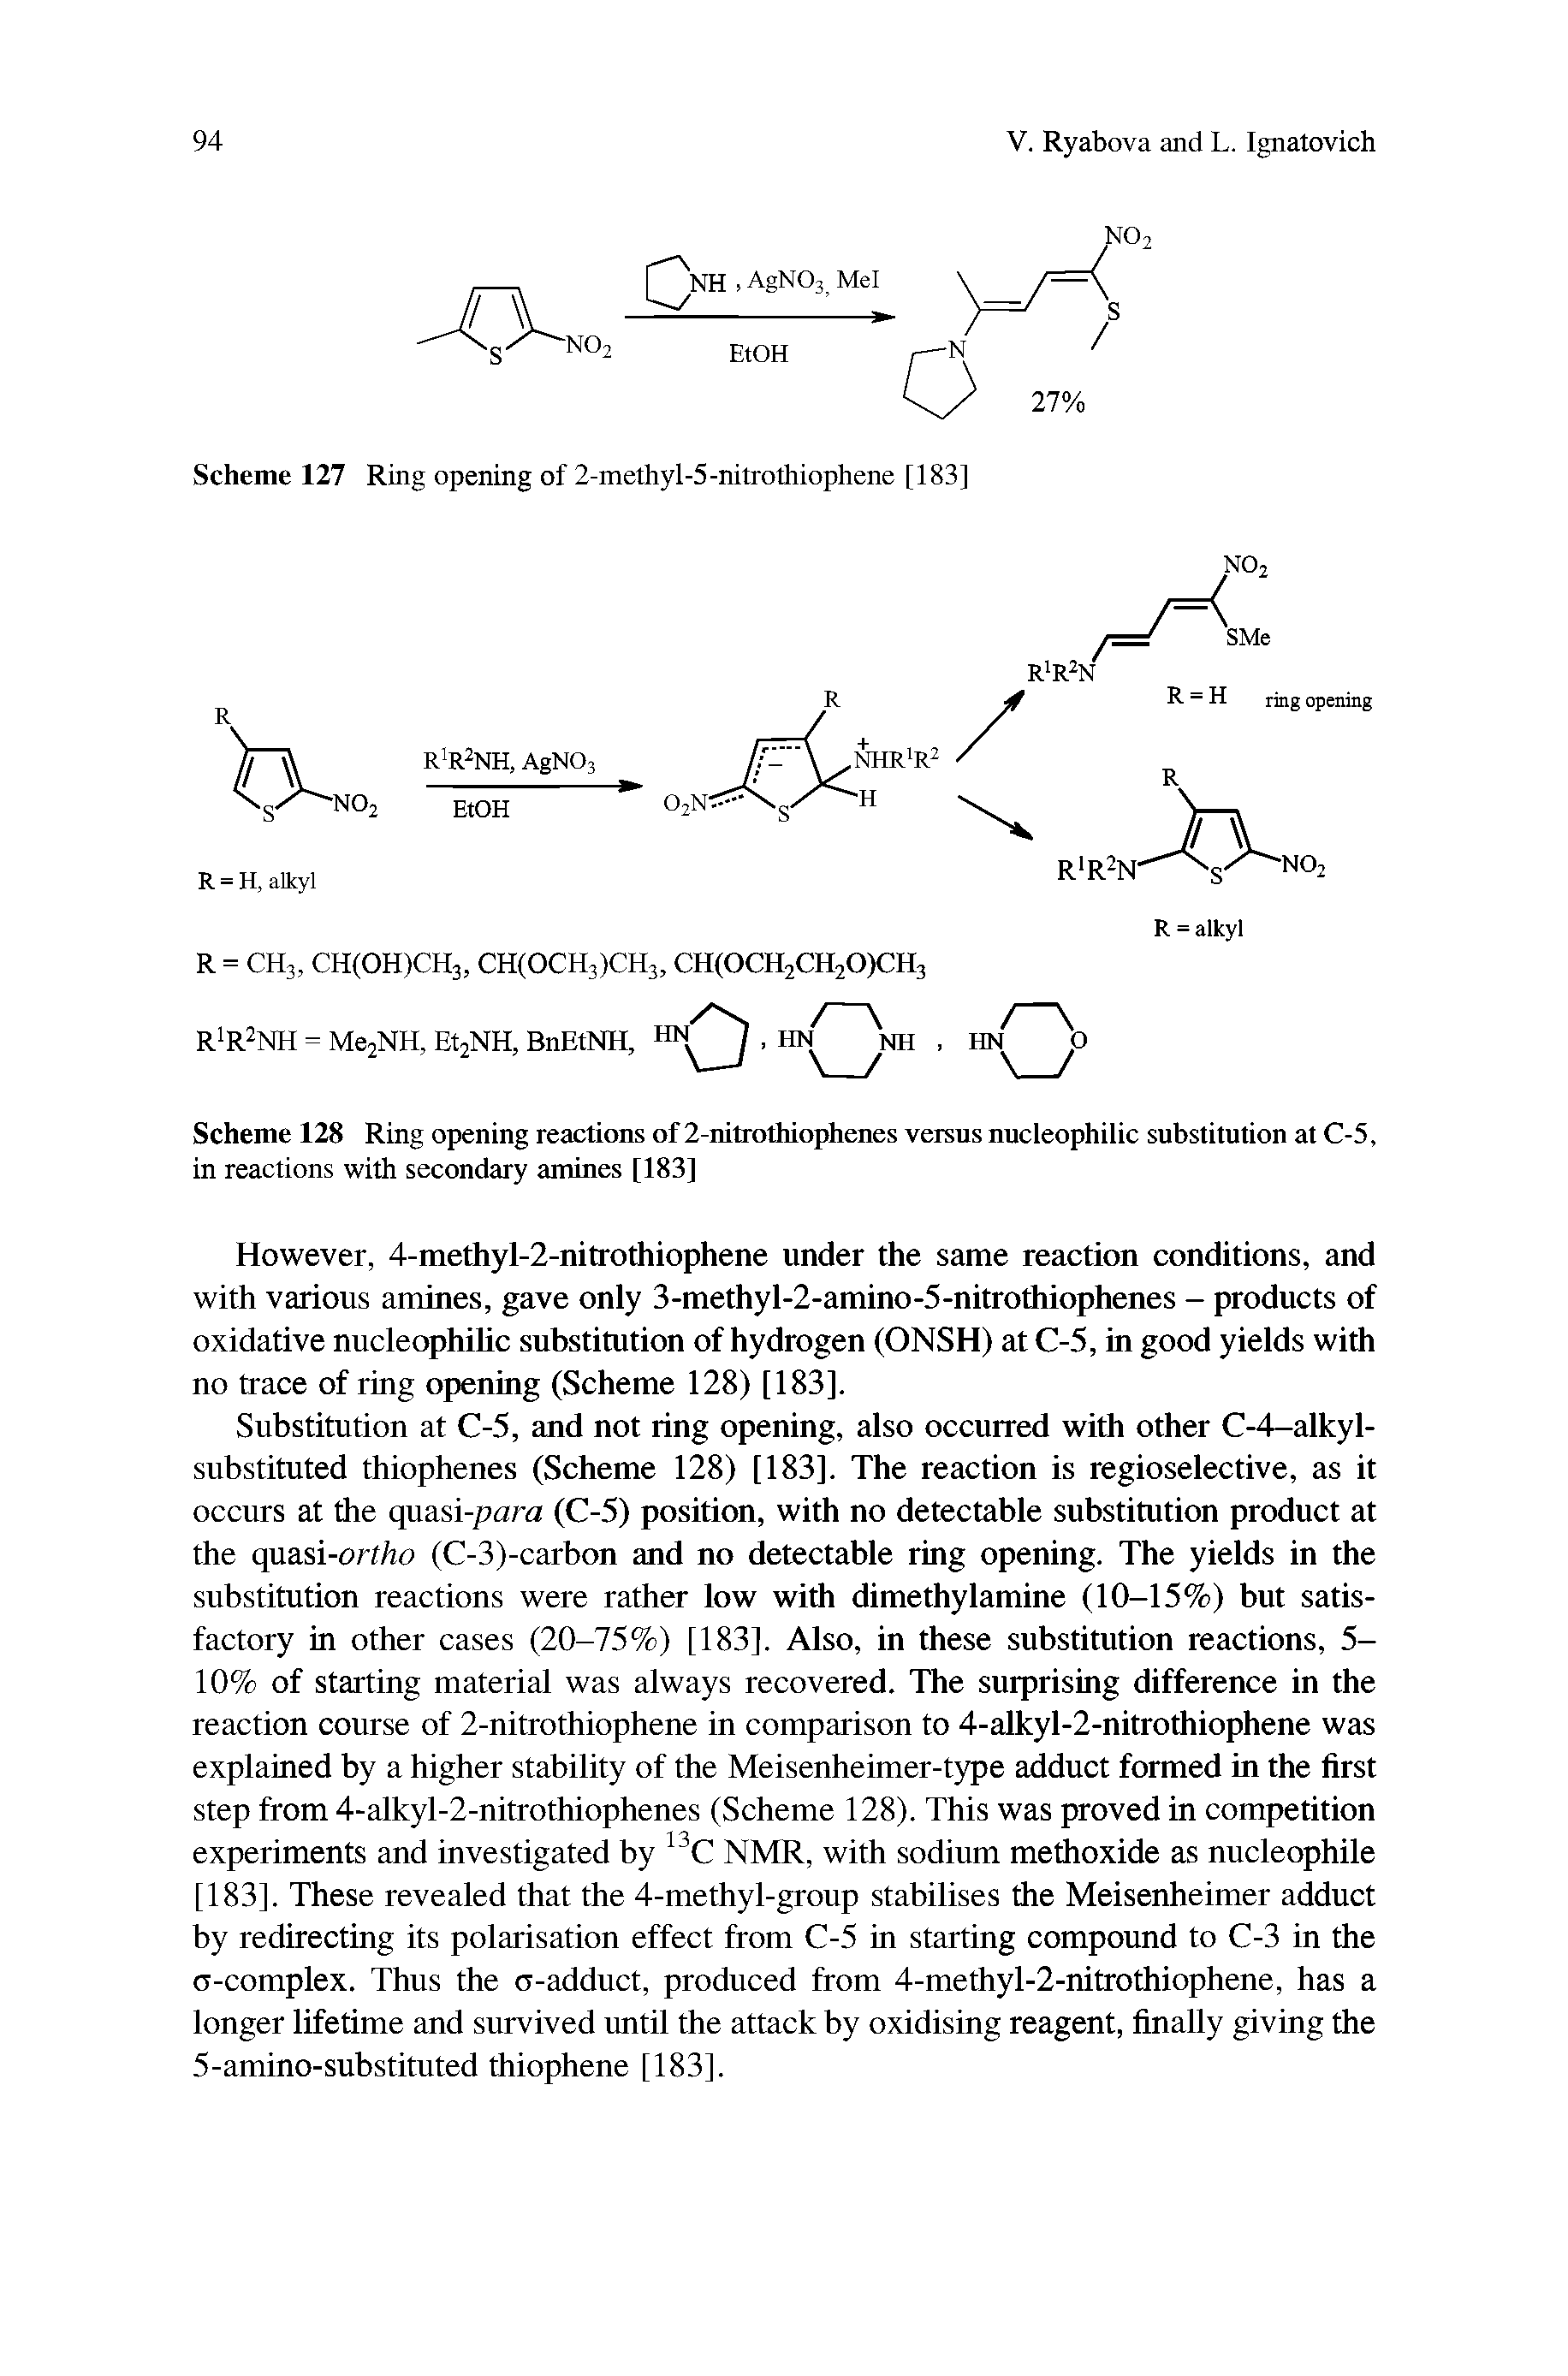 Scheme 128 Ring opening reactions of 2-nitFothiophenes versus nucleophilic substitution at C-5, in reactions with secondary amines [183]...